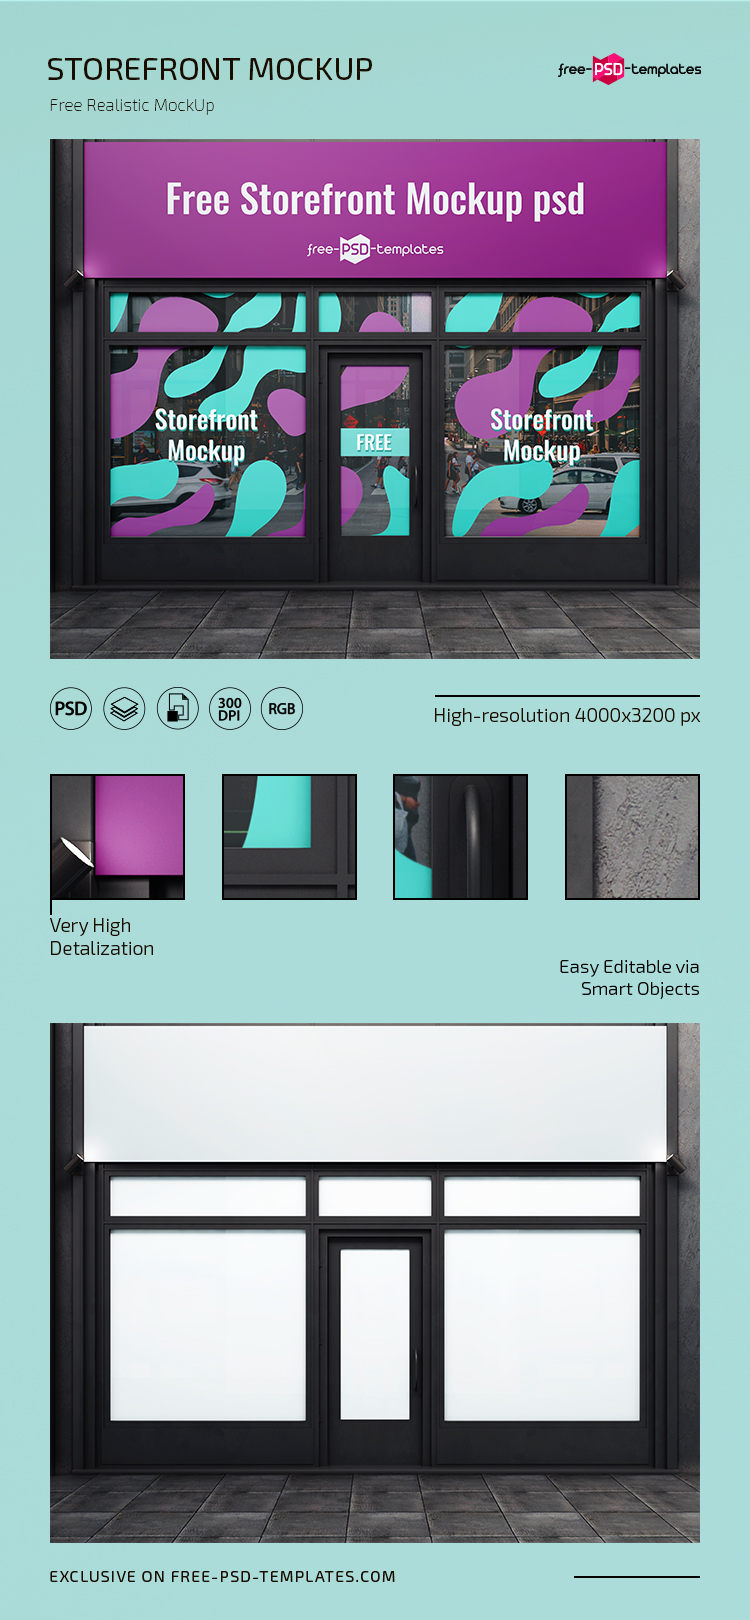 Download Free Storefront Mockup Psd Free Psd Templates